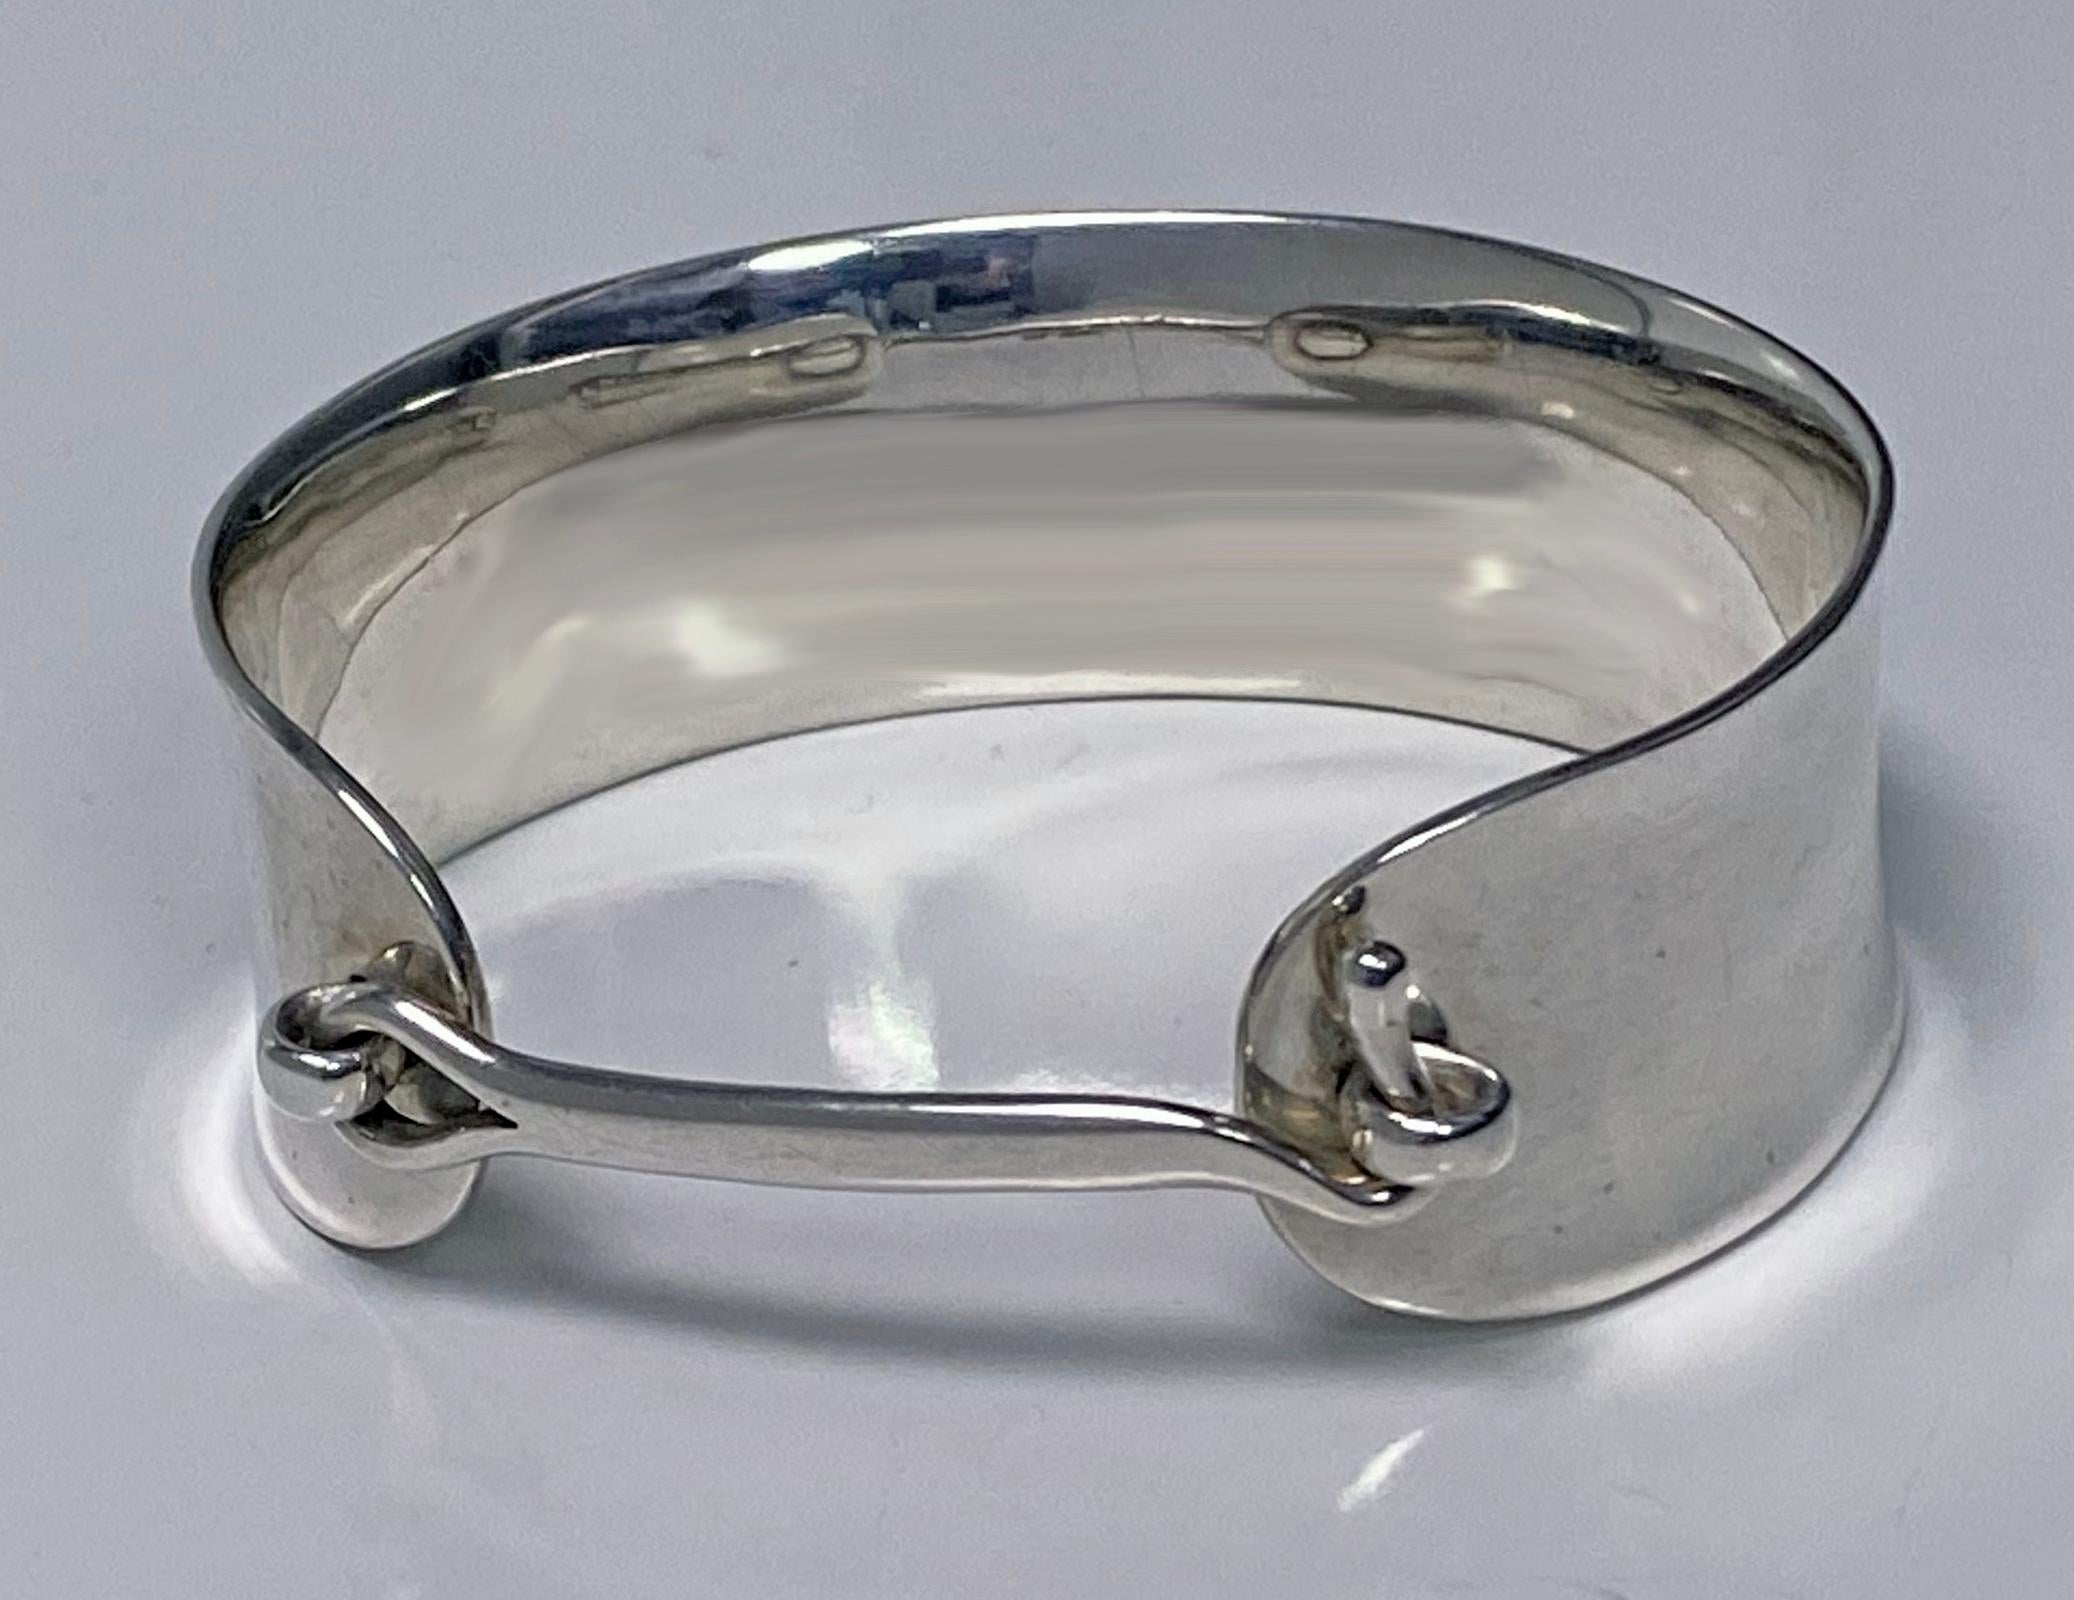 Vivianna Torun Rare Sterling Silver Cuff Bangle C.1960. This is rarely seen in this design. Substantial hand made slight undulating oval cuff bangle with central silver hook closure integral to design when depressed at sides. Will fit up to 8 inch